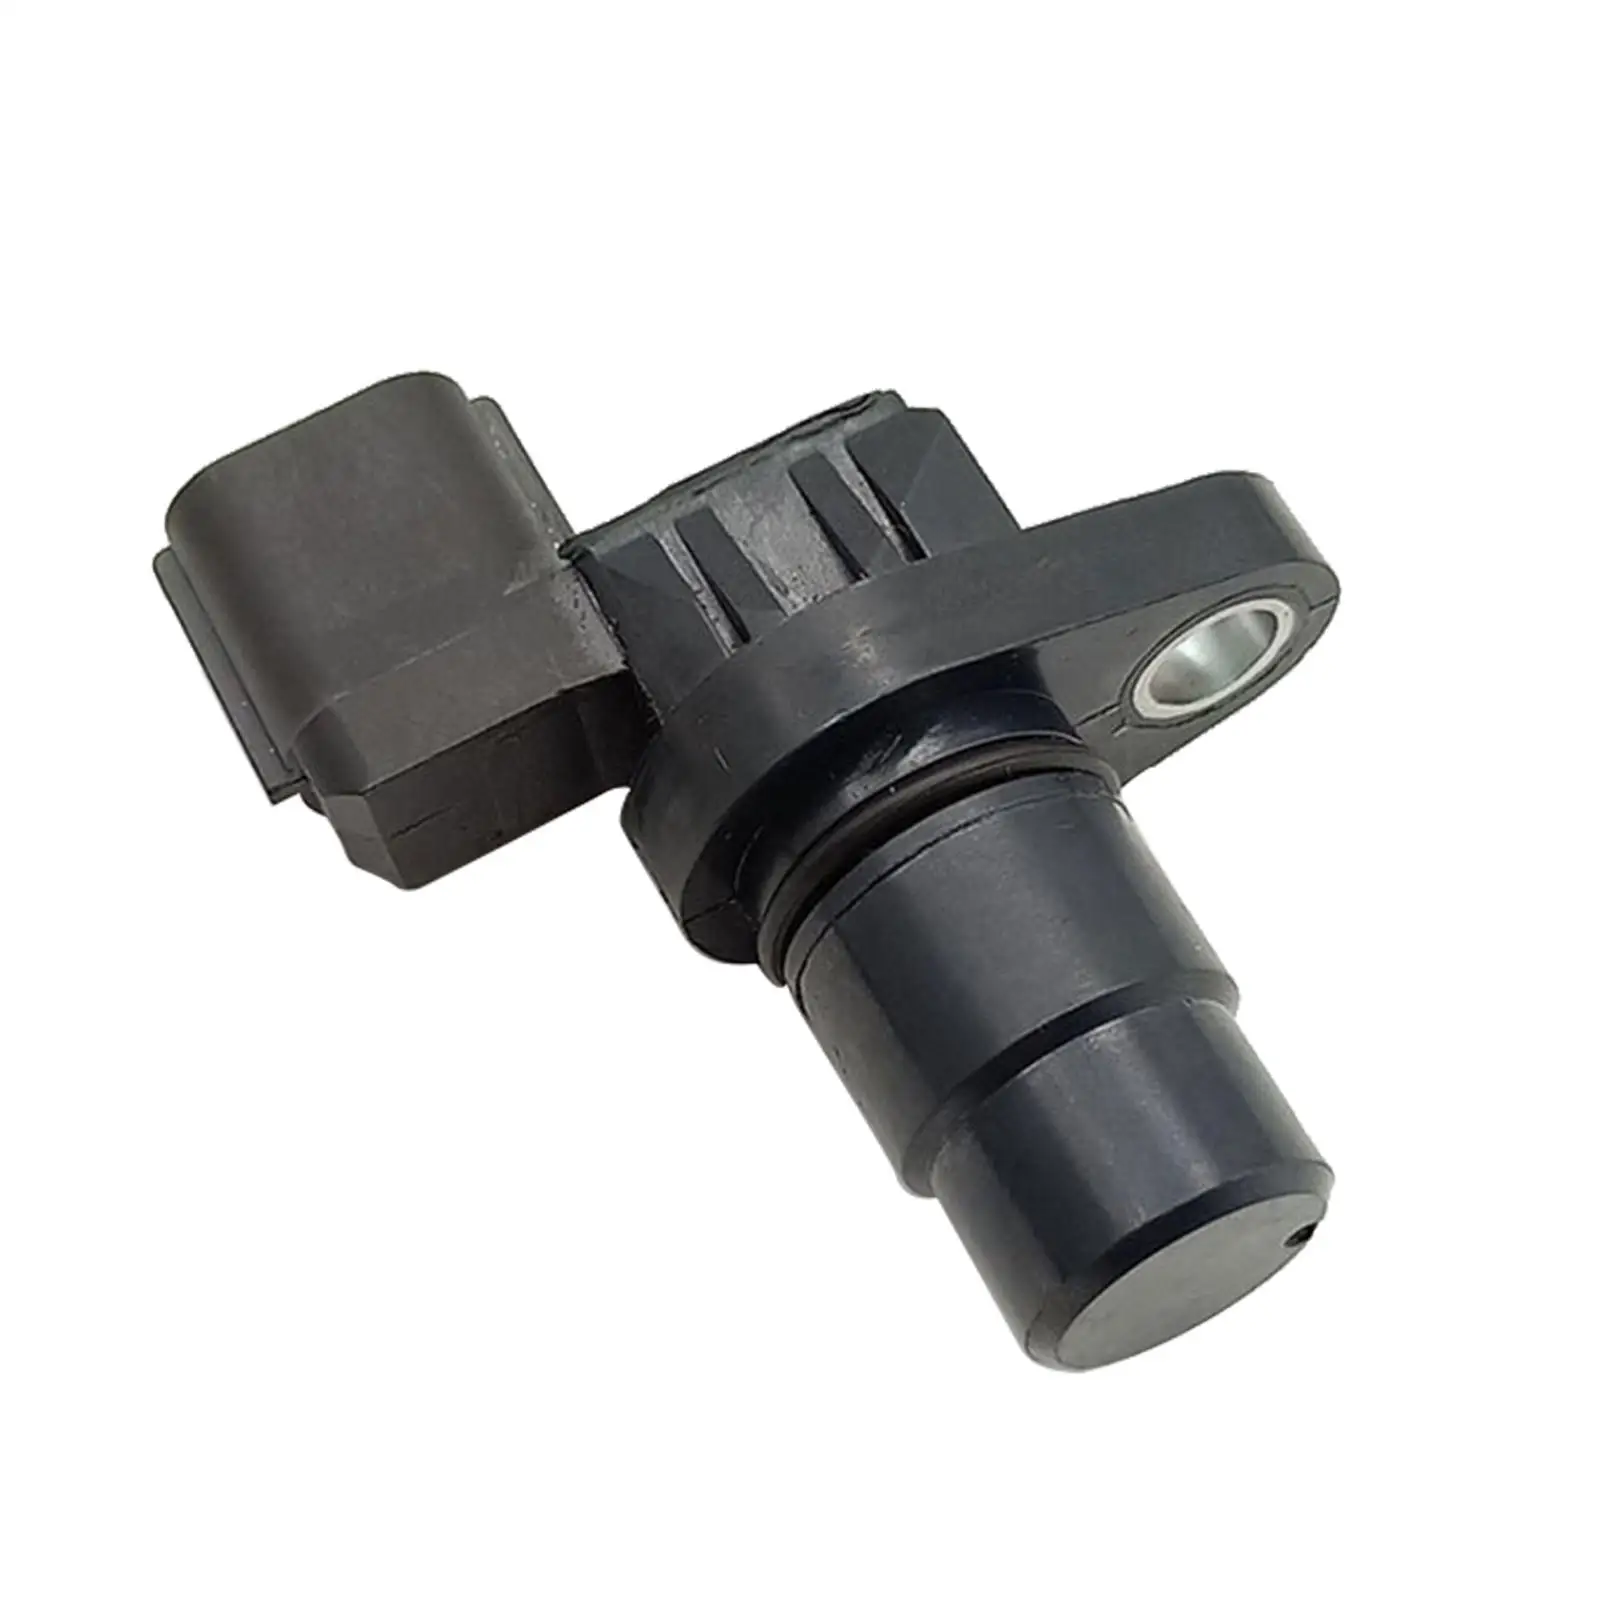 1x Automobile  Sensor,8941397202,Direct Replaces,8941397201,Brake System,8941352021,Wheel  G4T07692A MR567292 for 